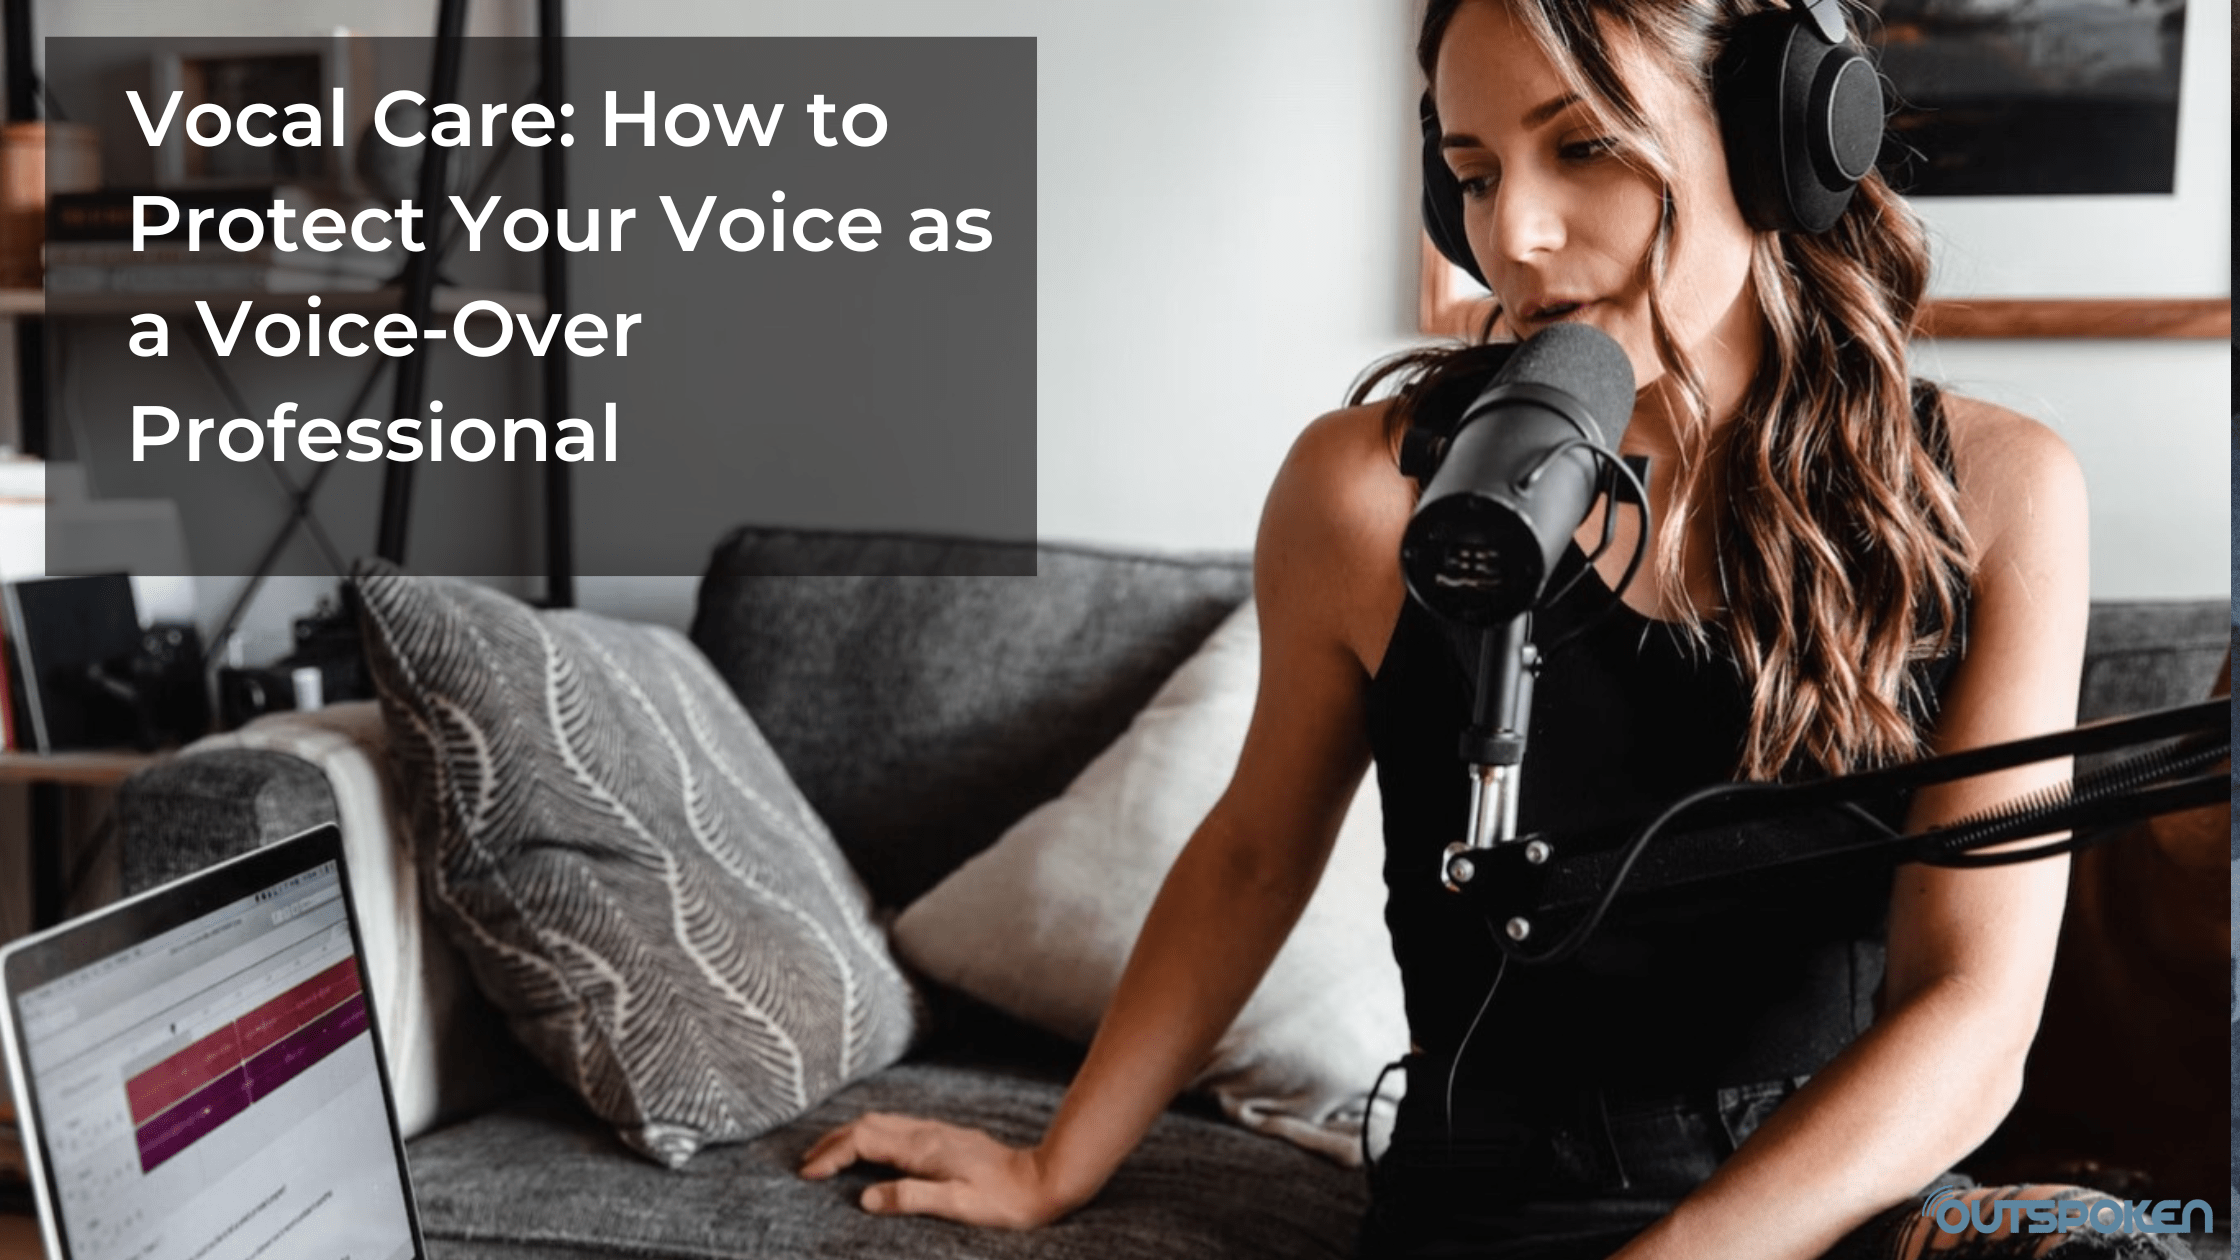 Vocal Care: How to Protect Your Voice as a Voice-Over Professional